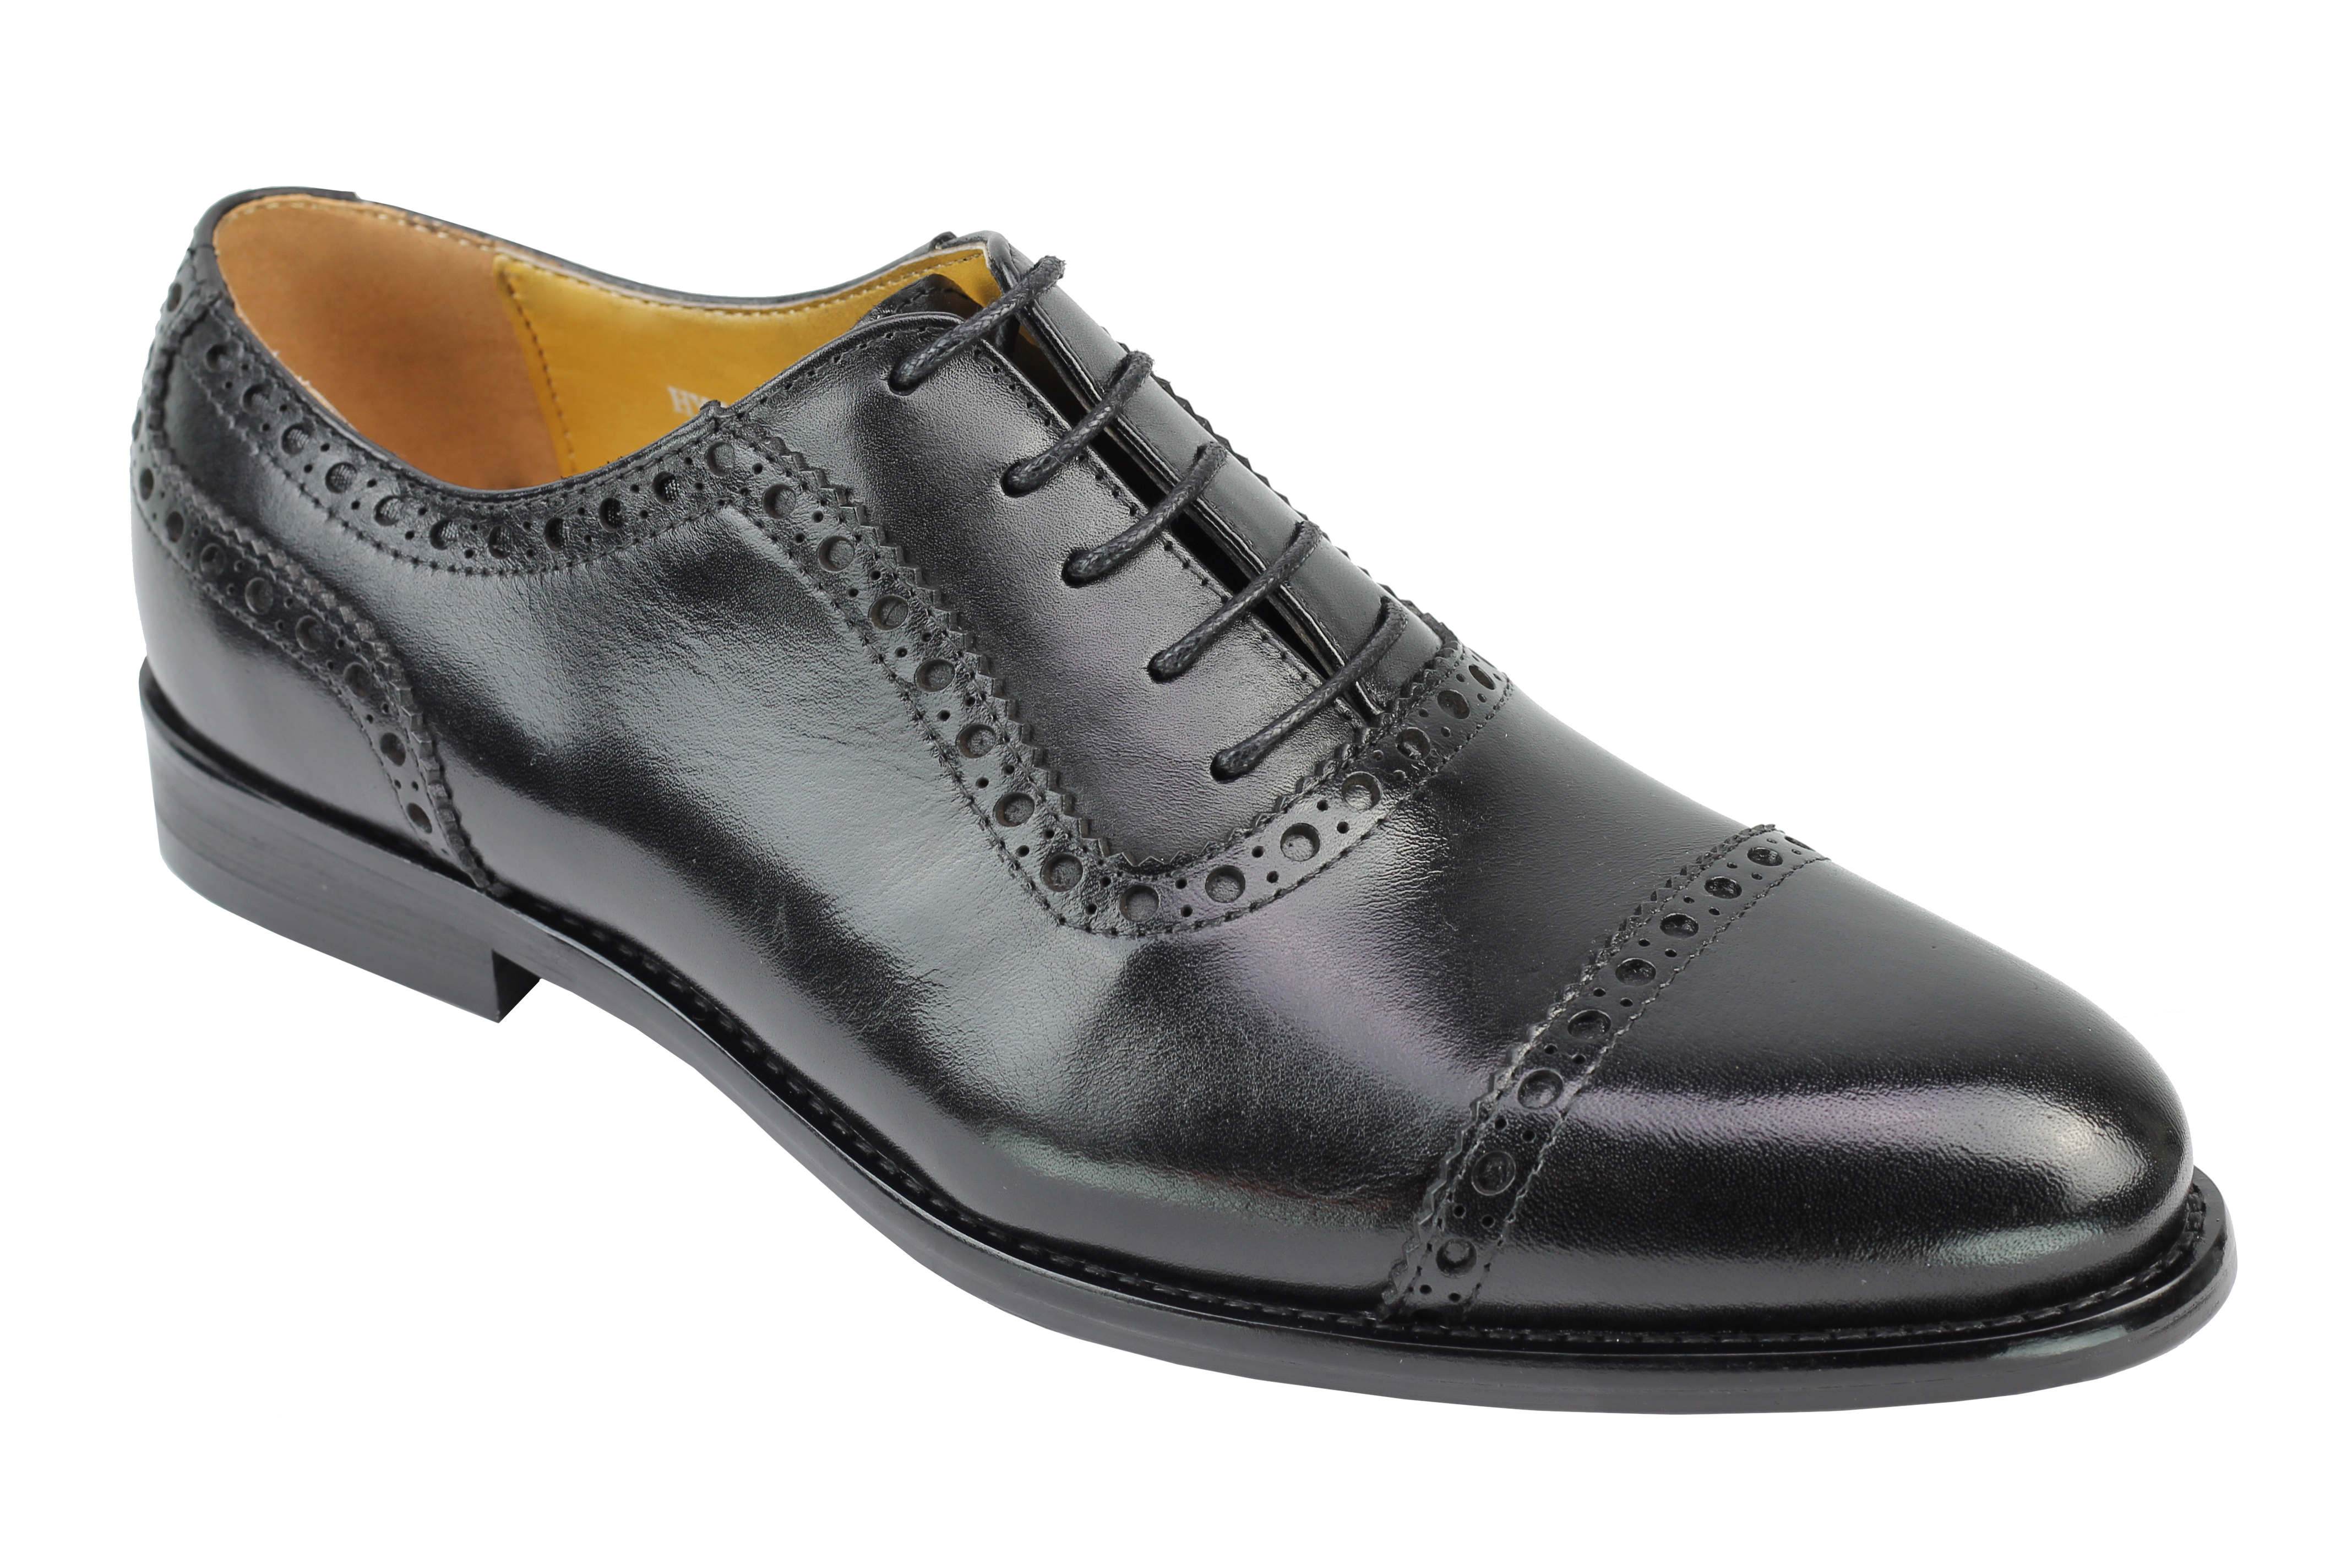 Real Leather Lace Up Formal Black Shoes